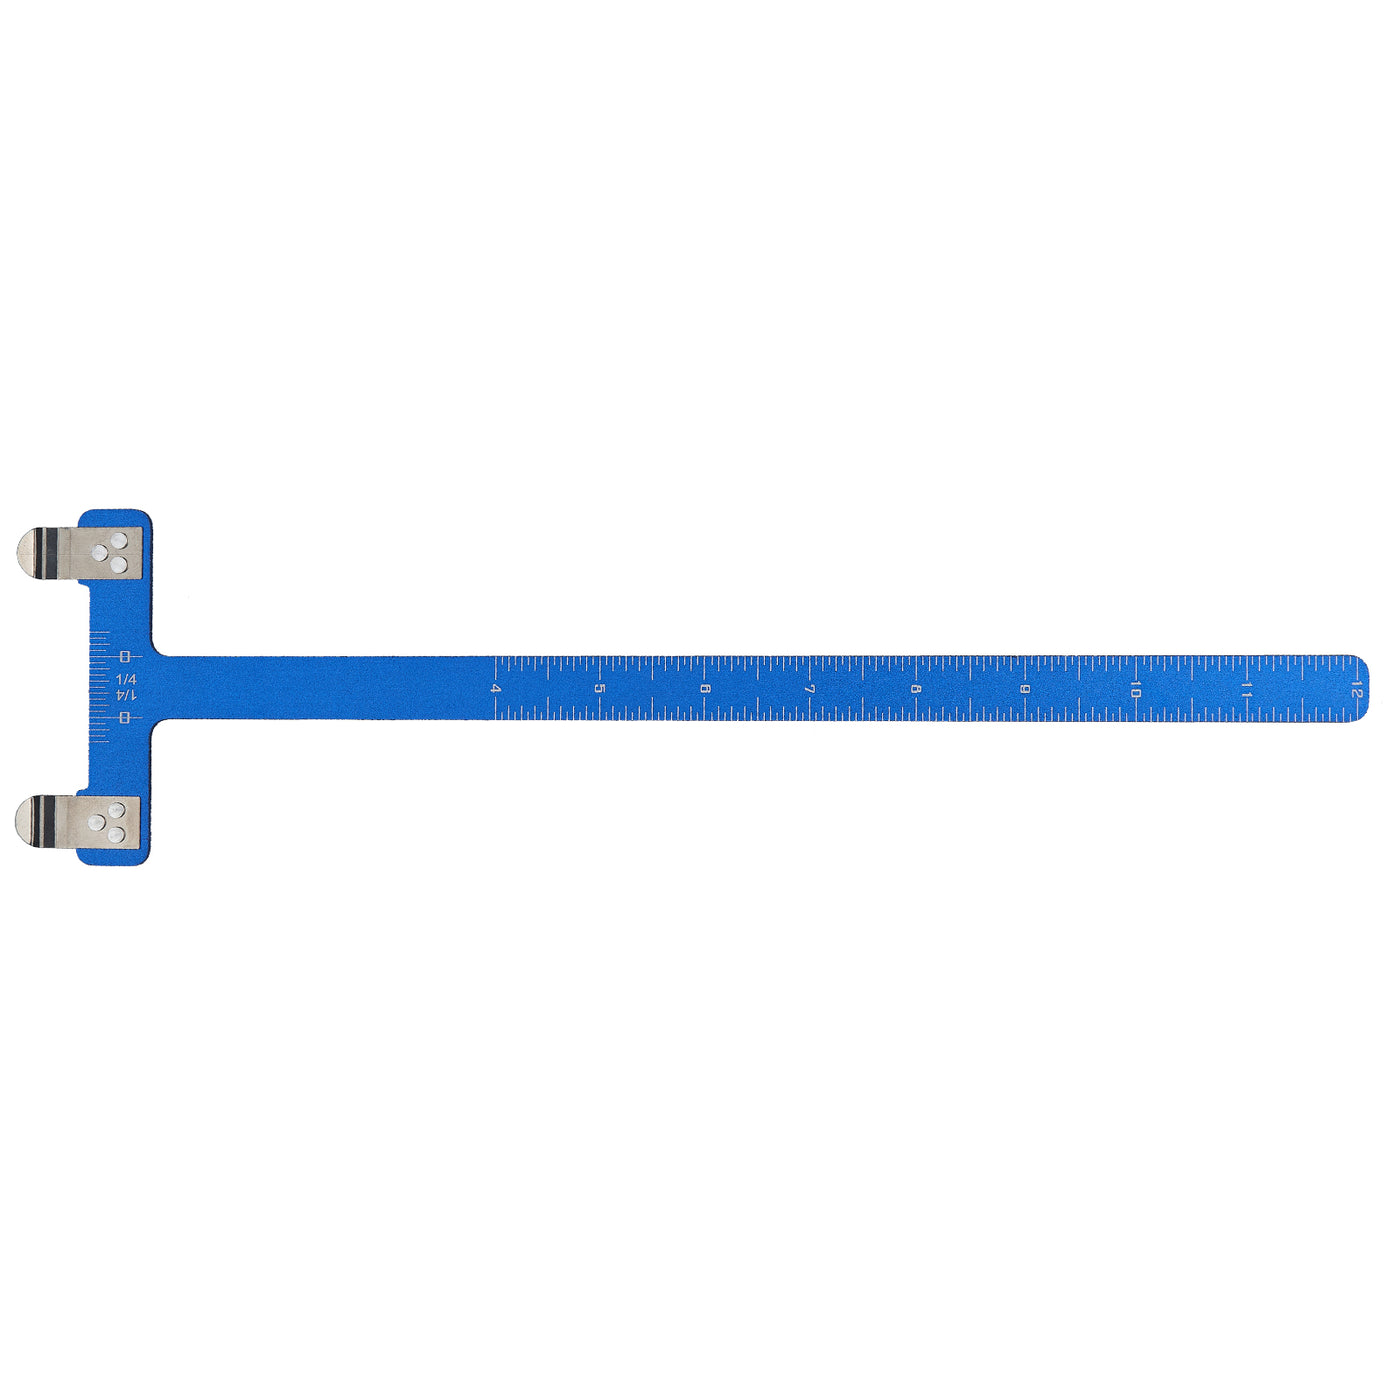 Bow T-Square Ruler